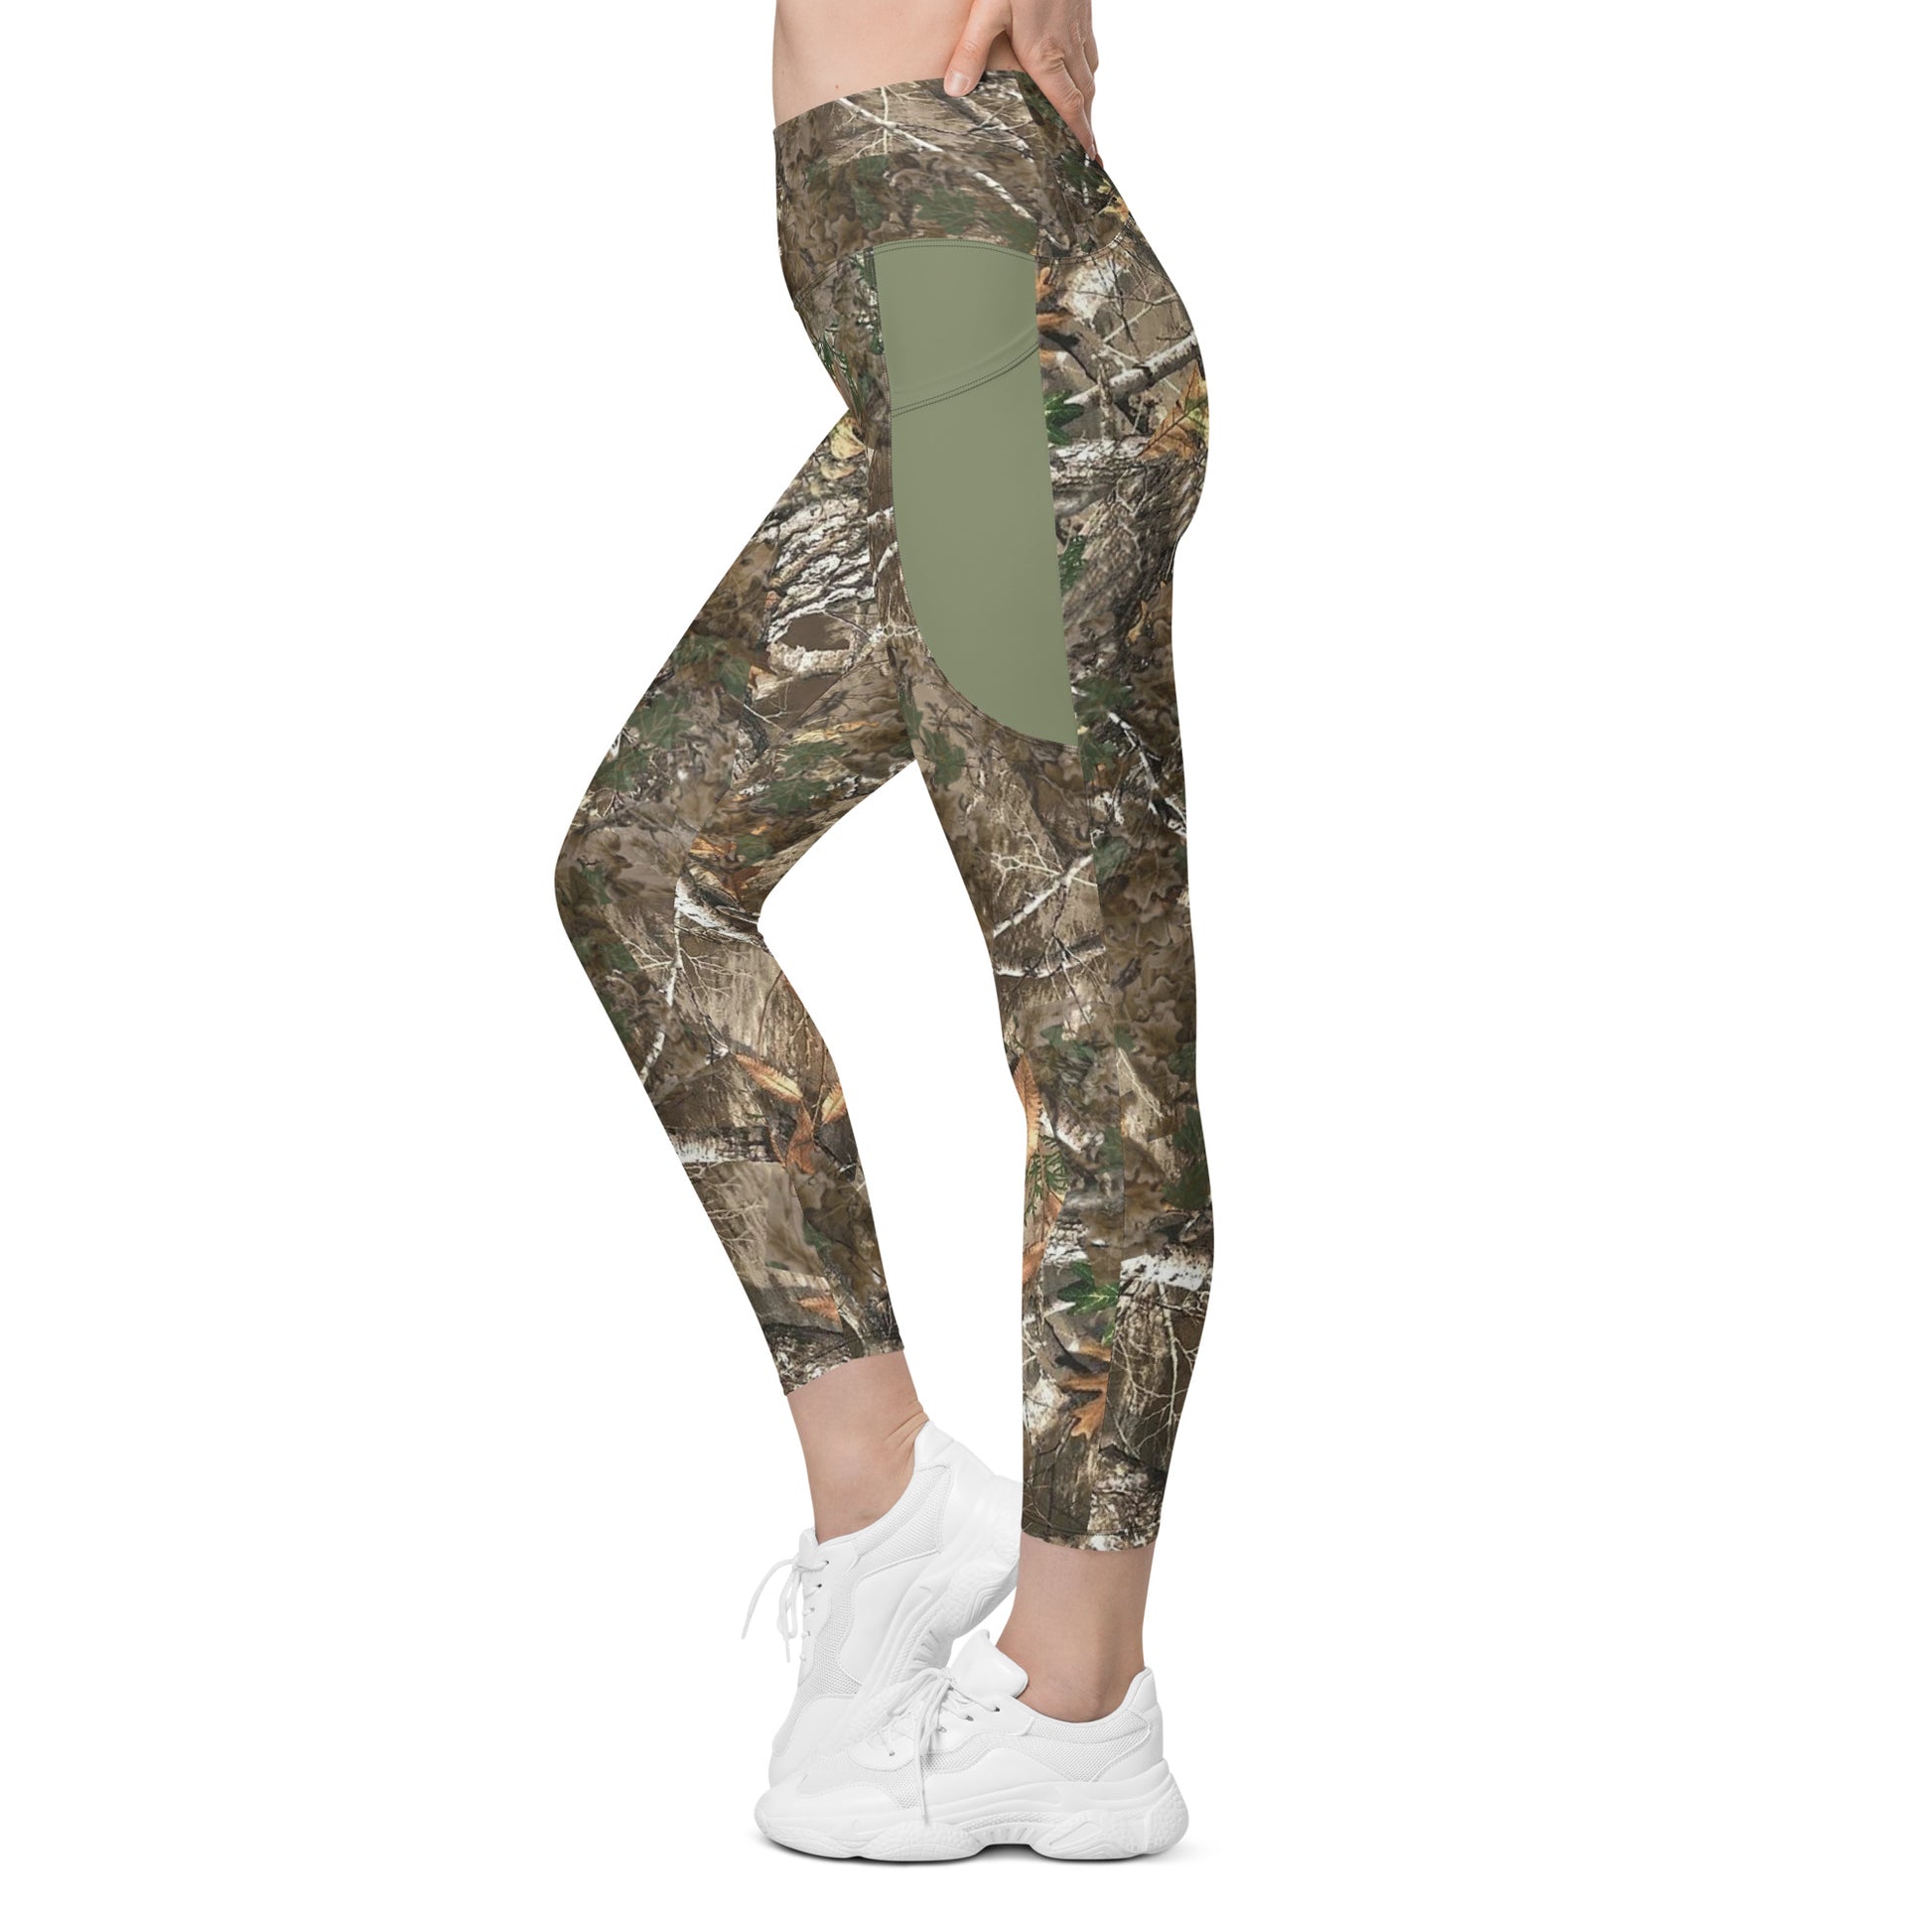 Wildfire Cigars Camouflage and military green activewear leggings facing the left